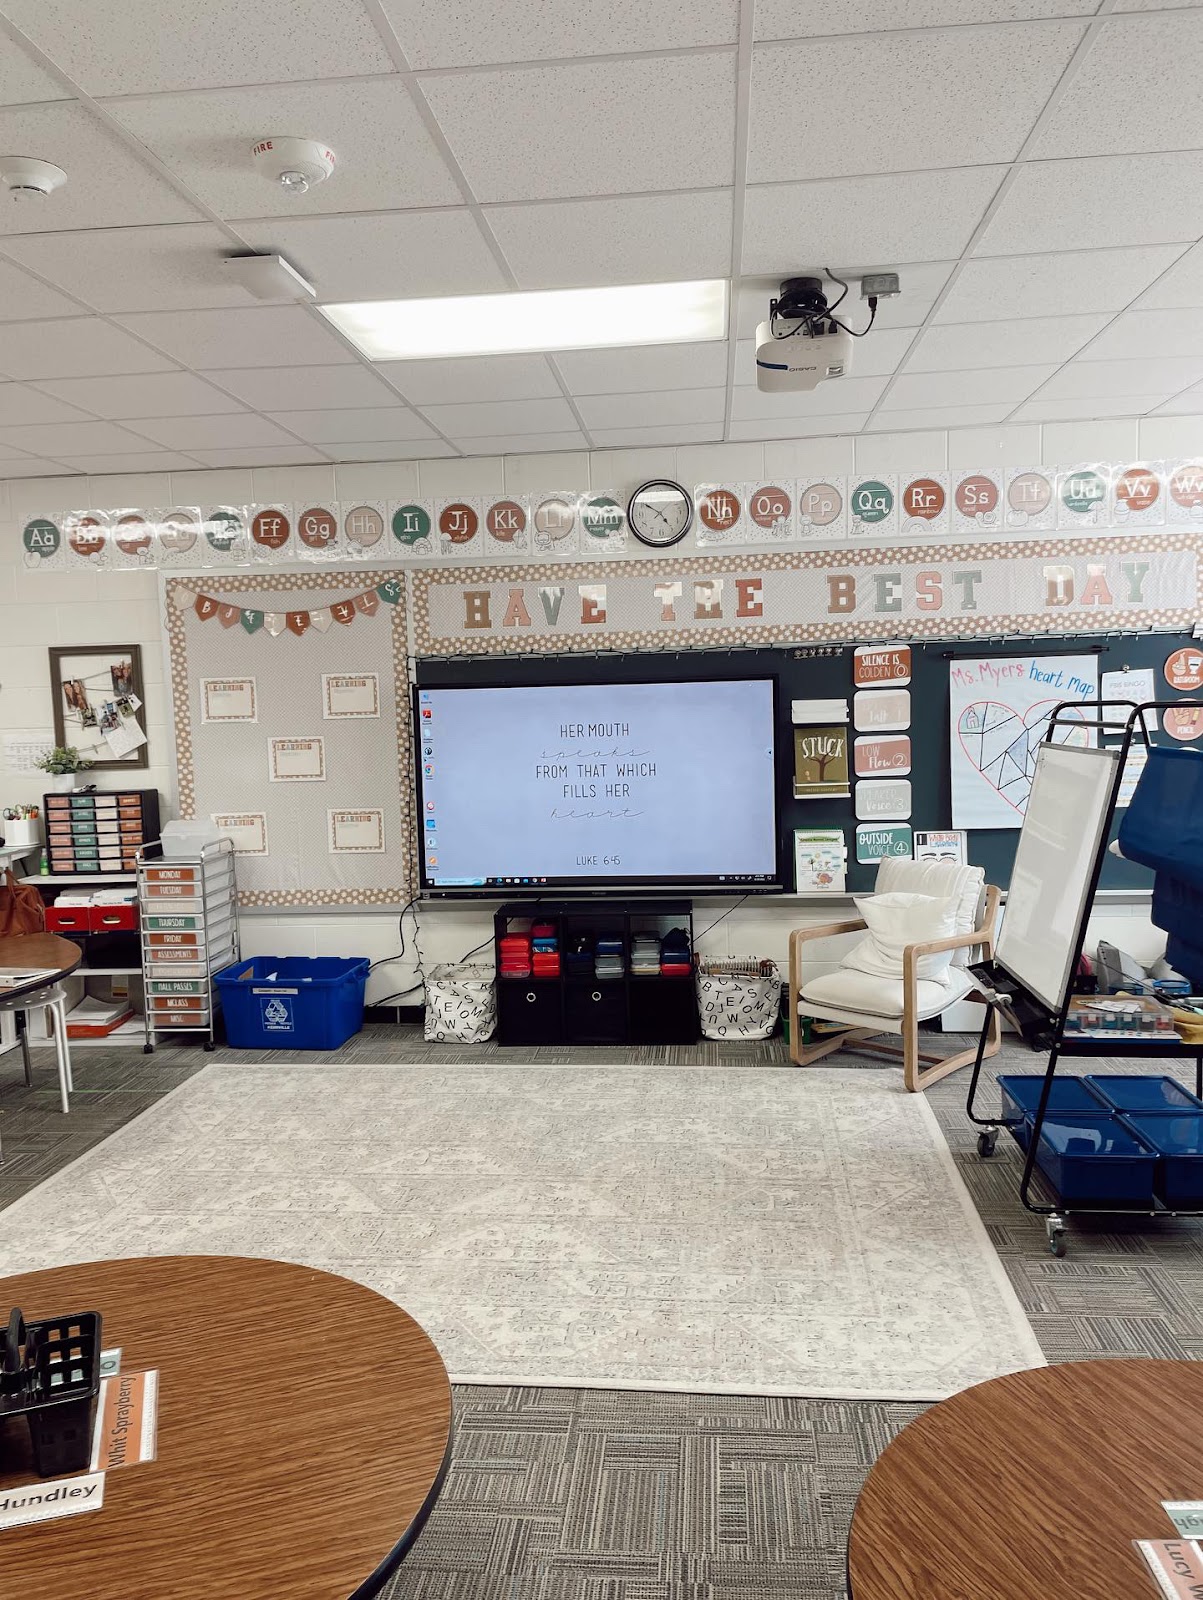 This image shows the front of a classroom decorated with the Simply Neutral decor bundle. 